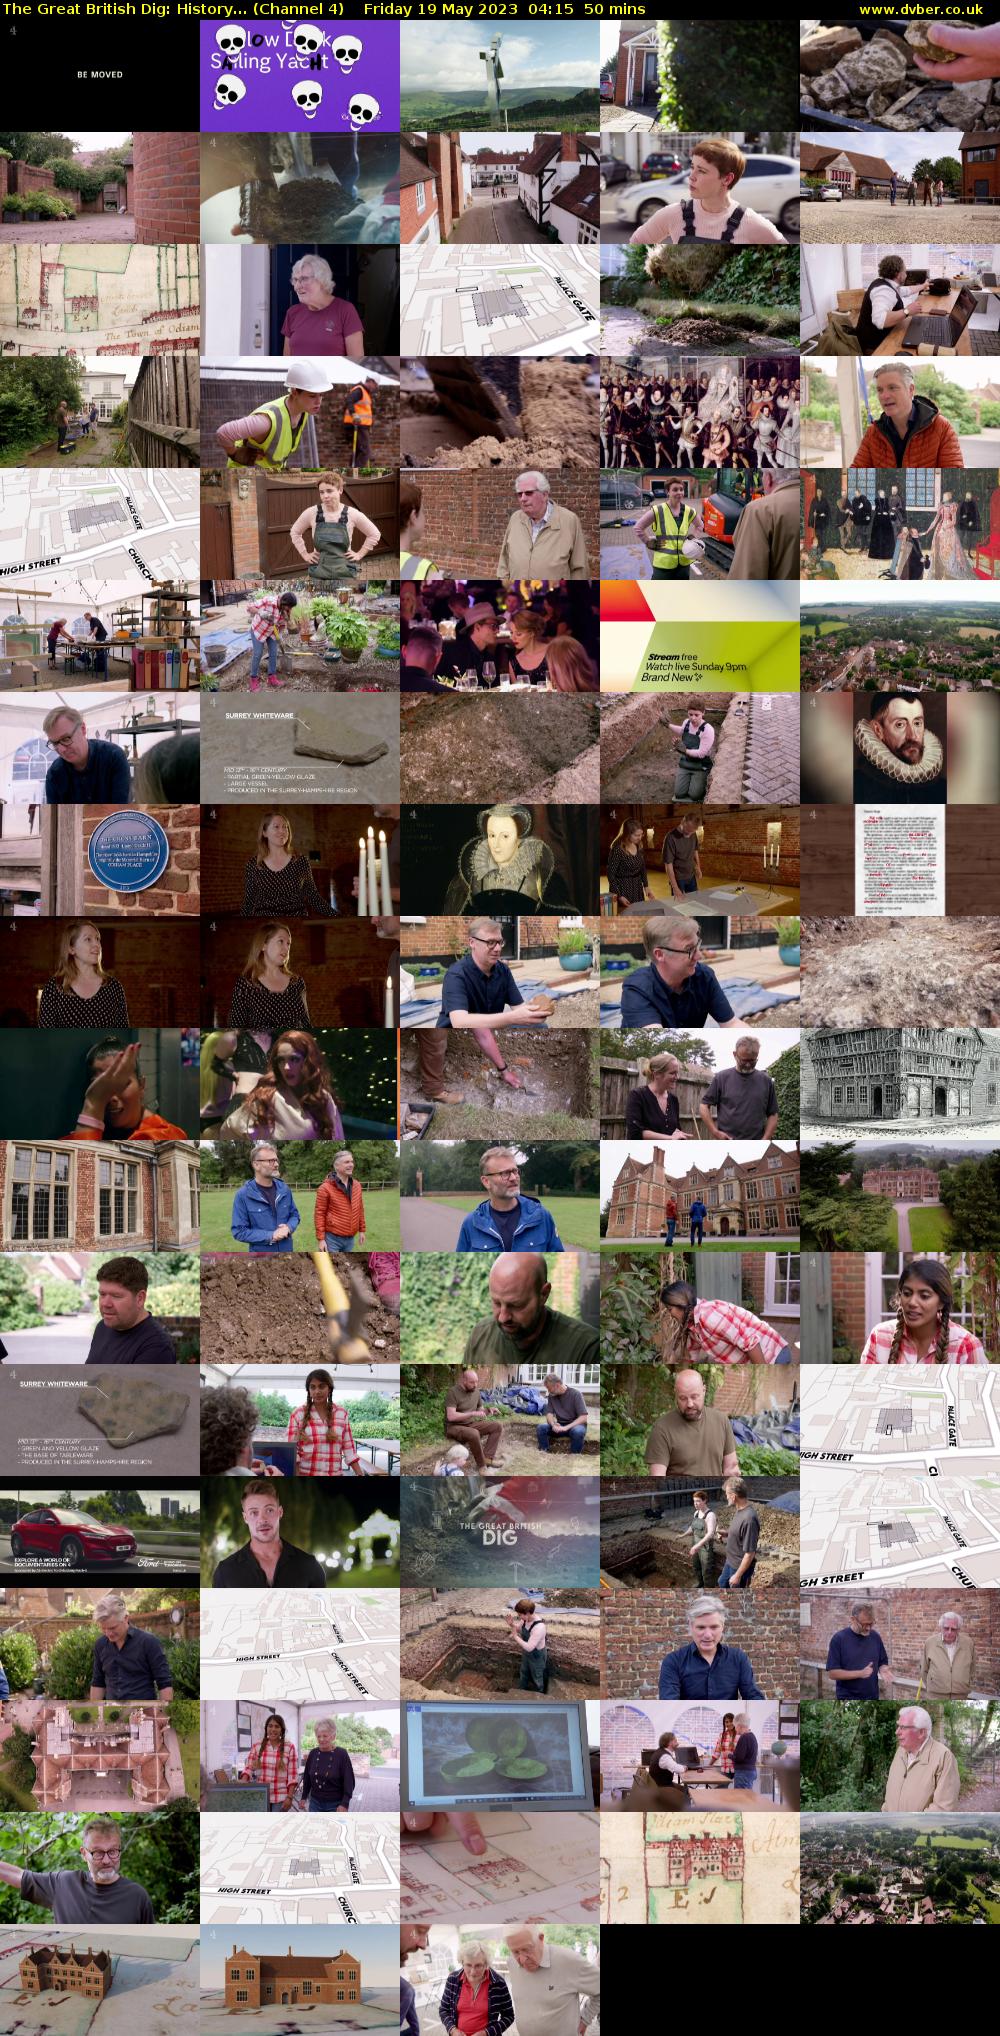 The Great British Dig: History... (Channel 4) Friday 19 May 2023 04:15 - 05:05